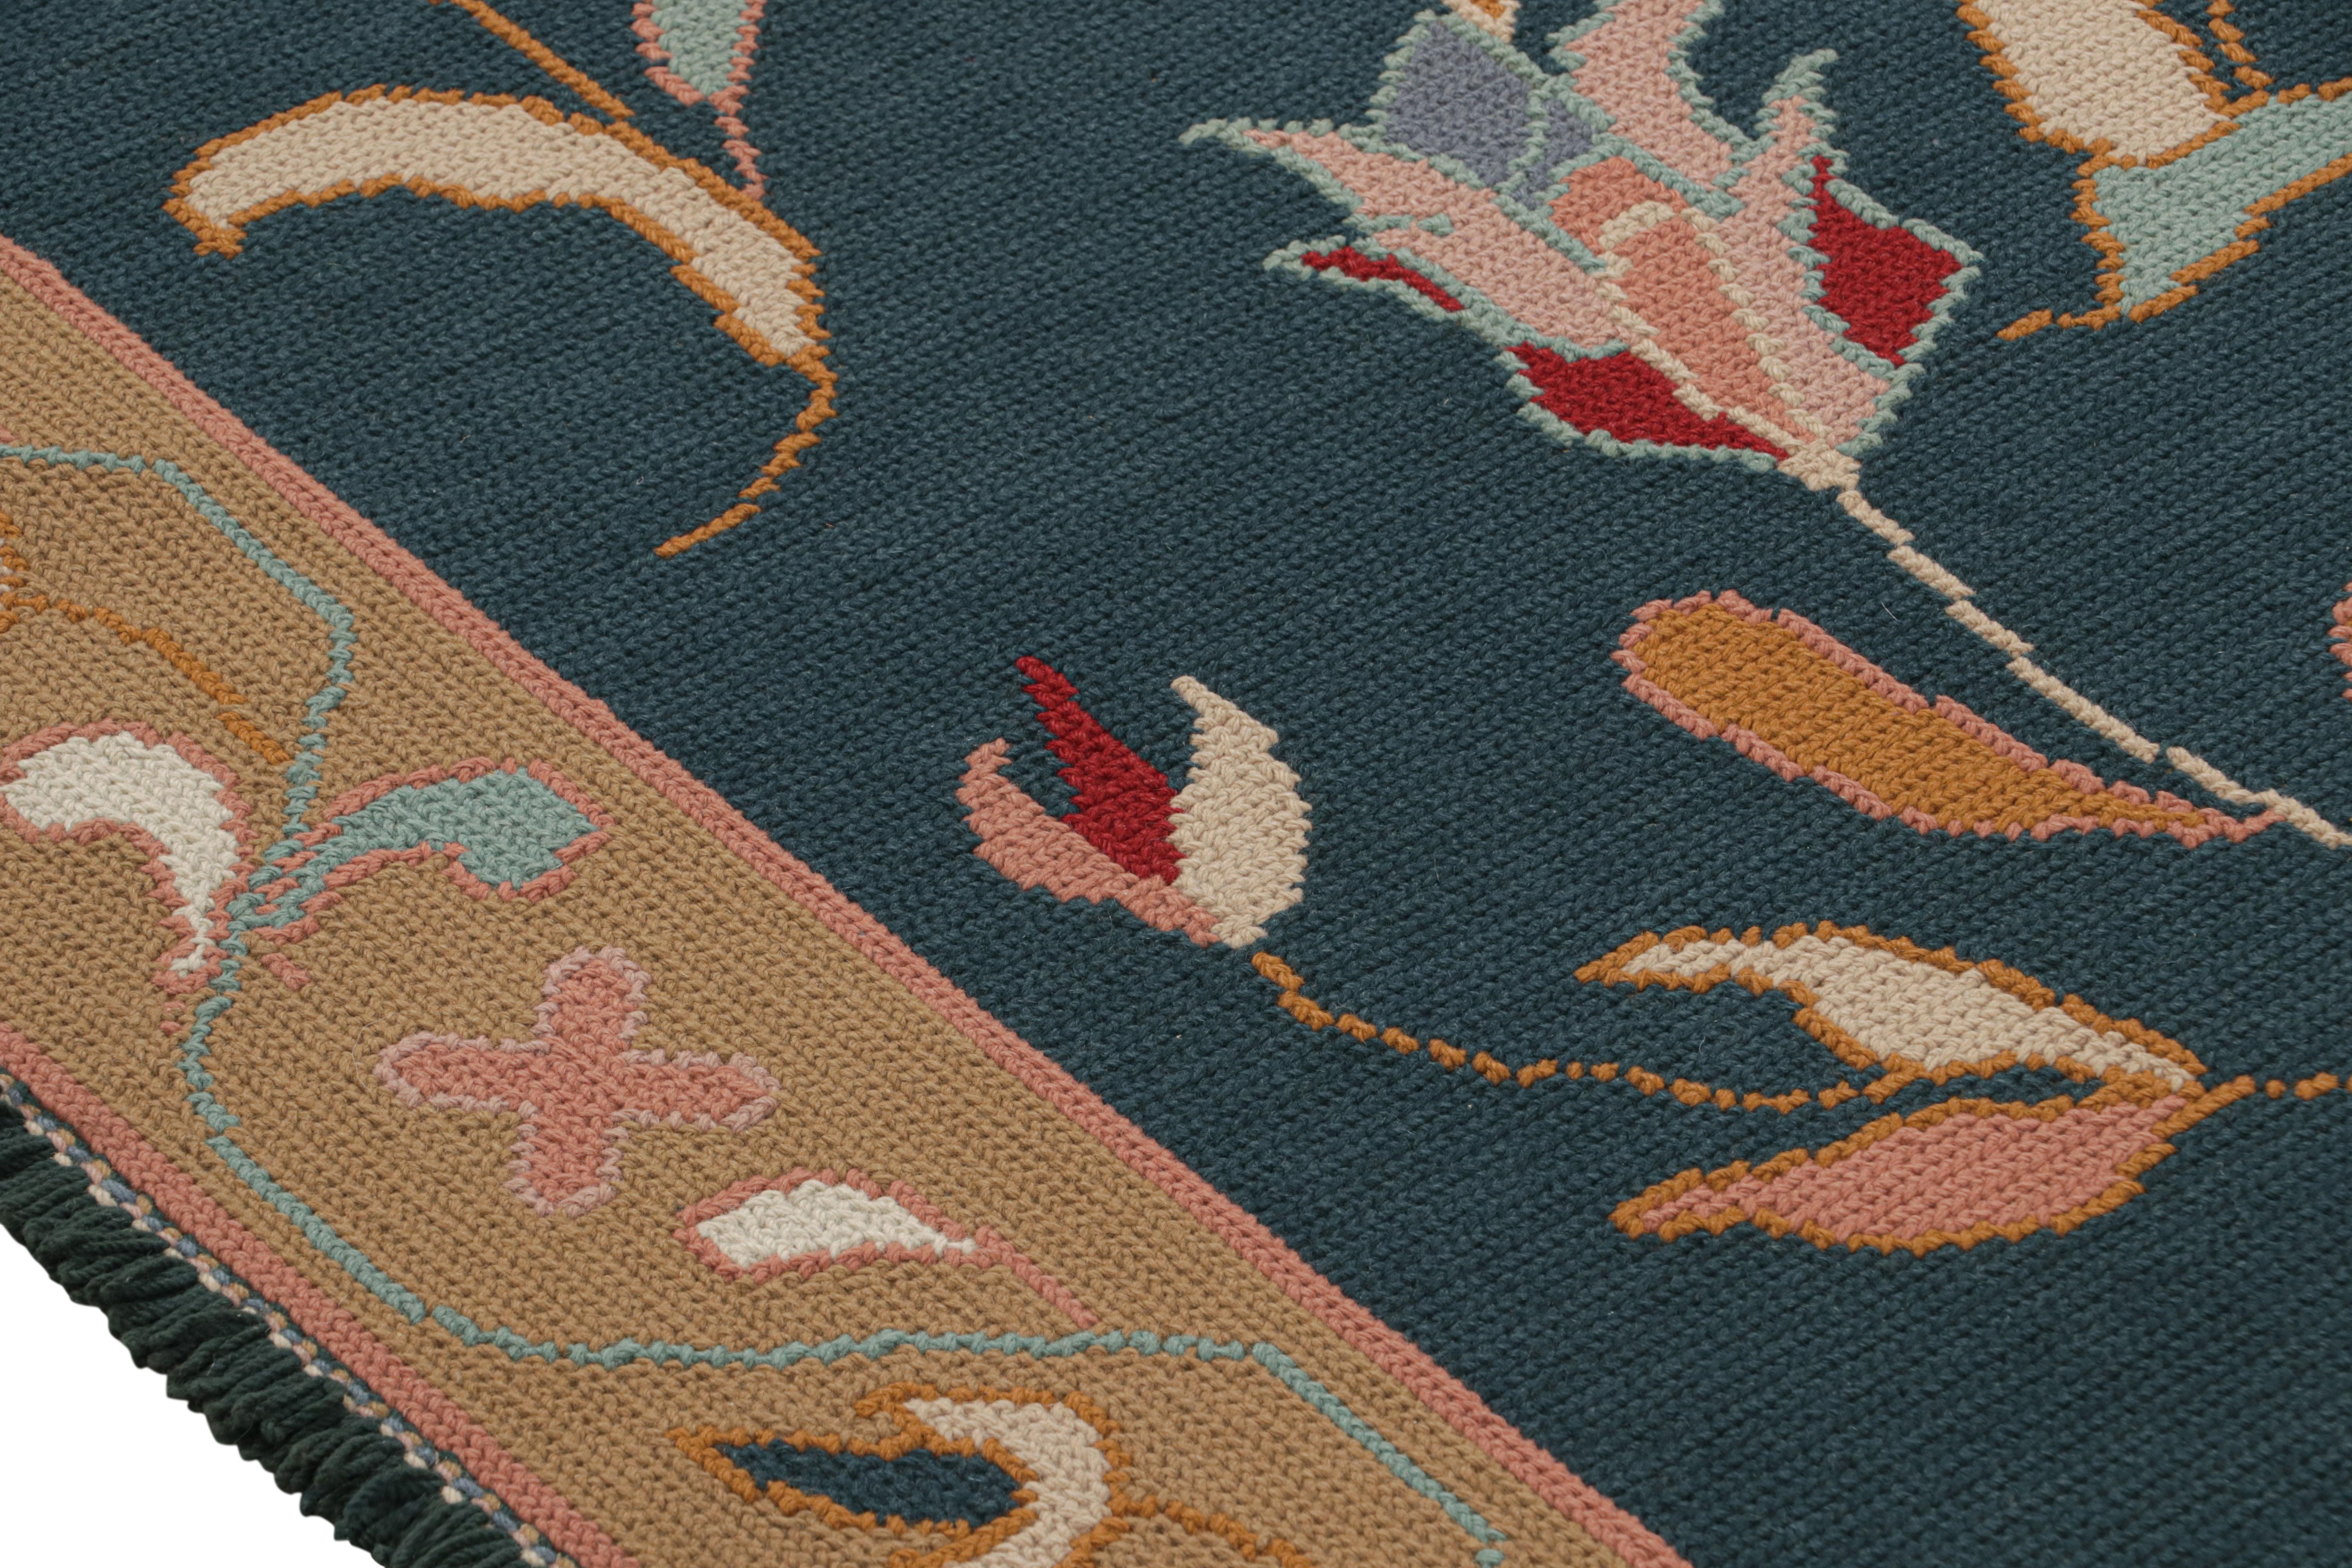 Vintage Arraiolos Runner Rug in Blue With Floral Patterns, From Rug & Kilim In New Condition For Sale In Long Island City, NY